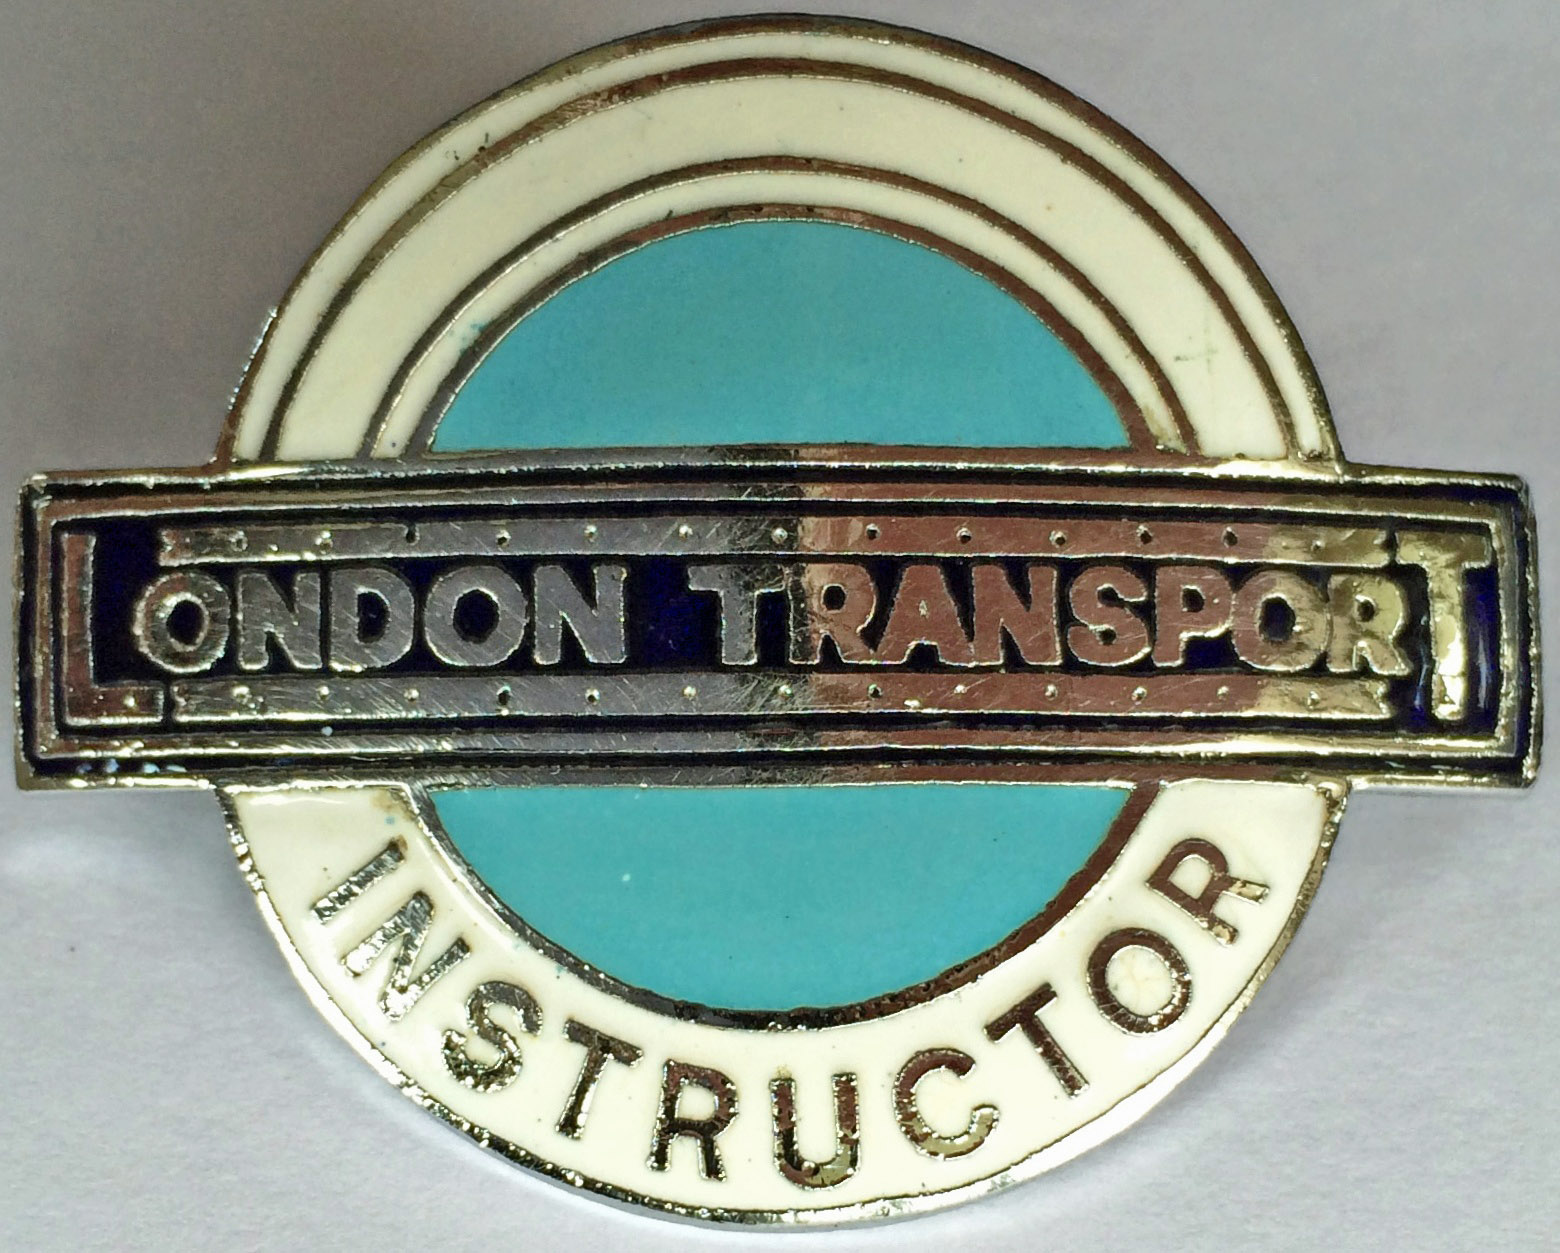 London Transport Bus Conductor Instructor's CAP BADGE as issued to experienced bus conductors who